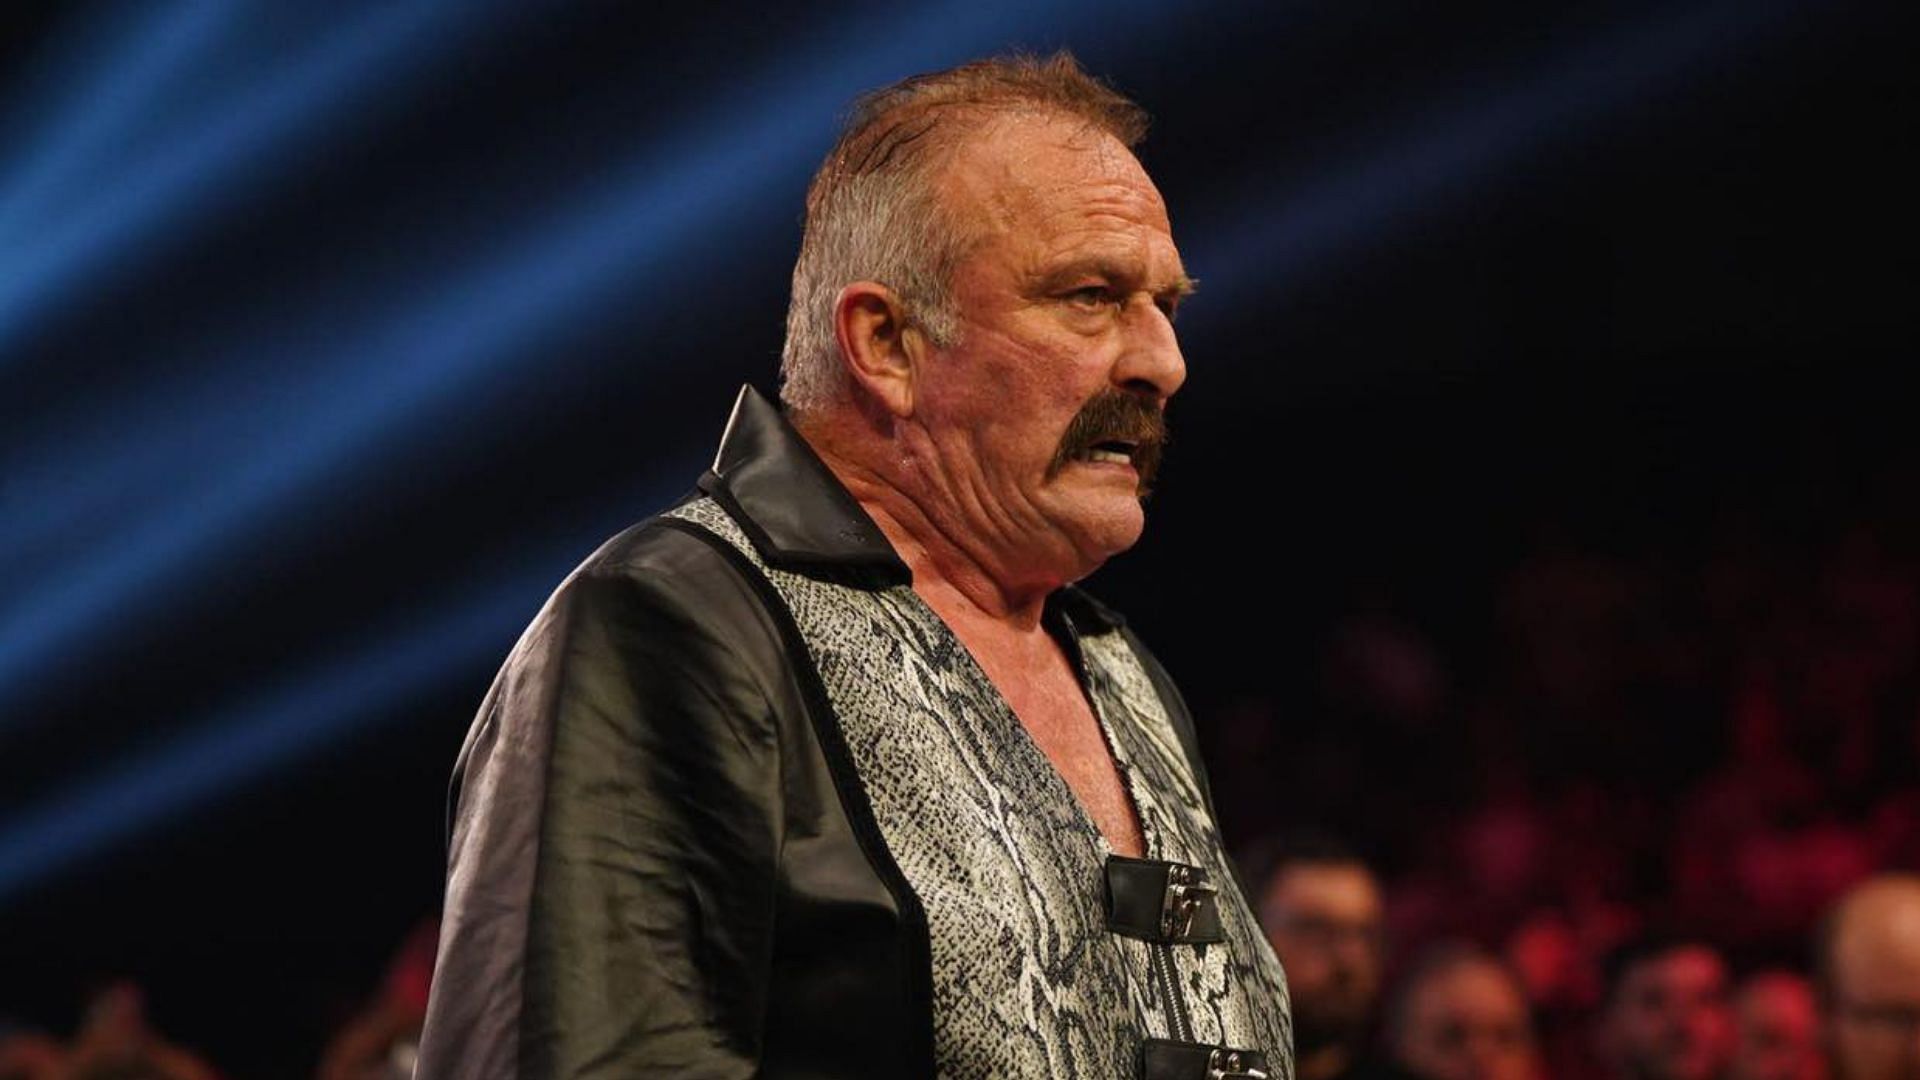 Jake Roberts at an AEW event in 2022